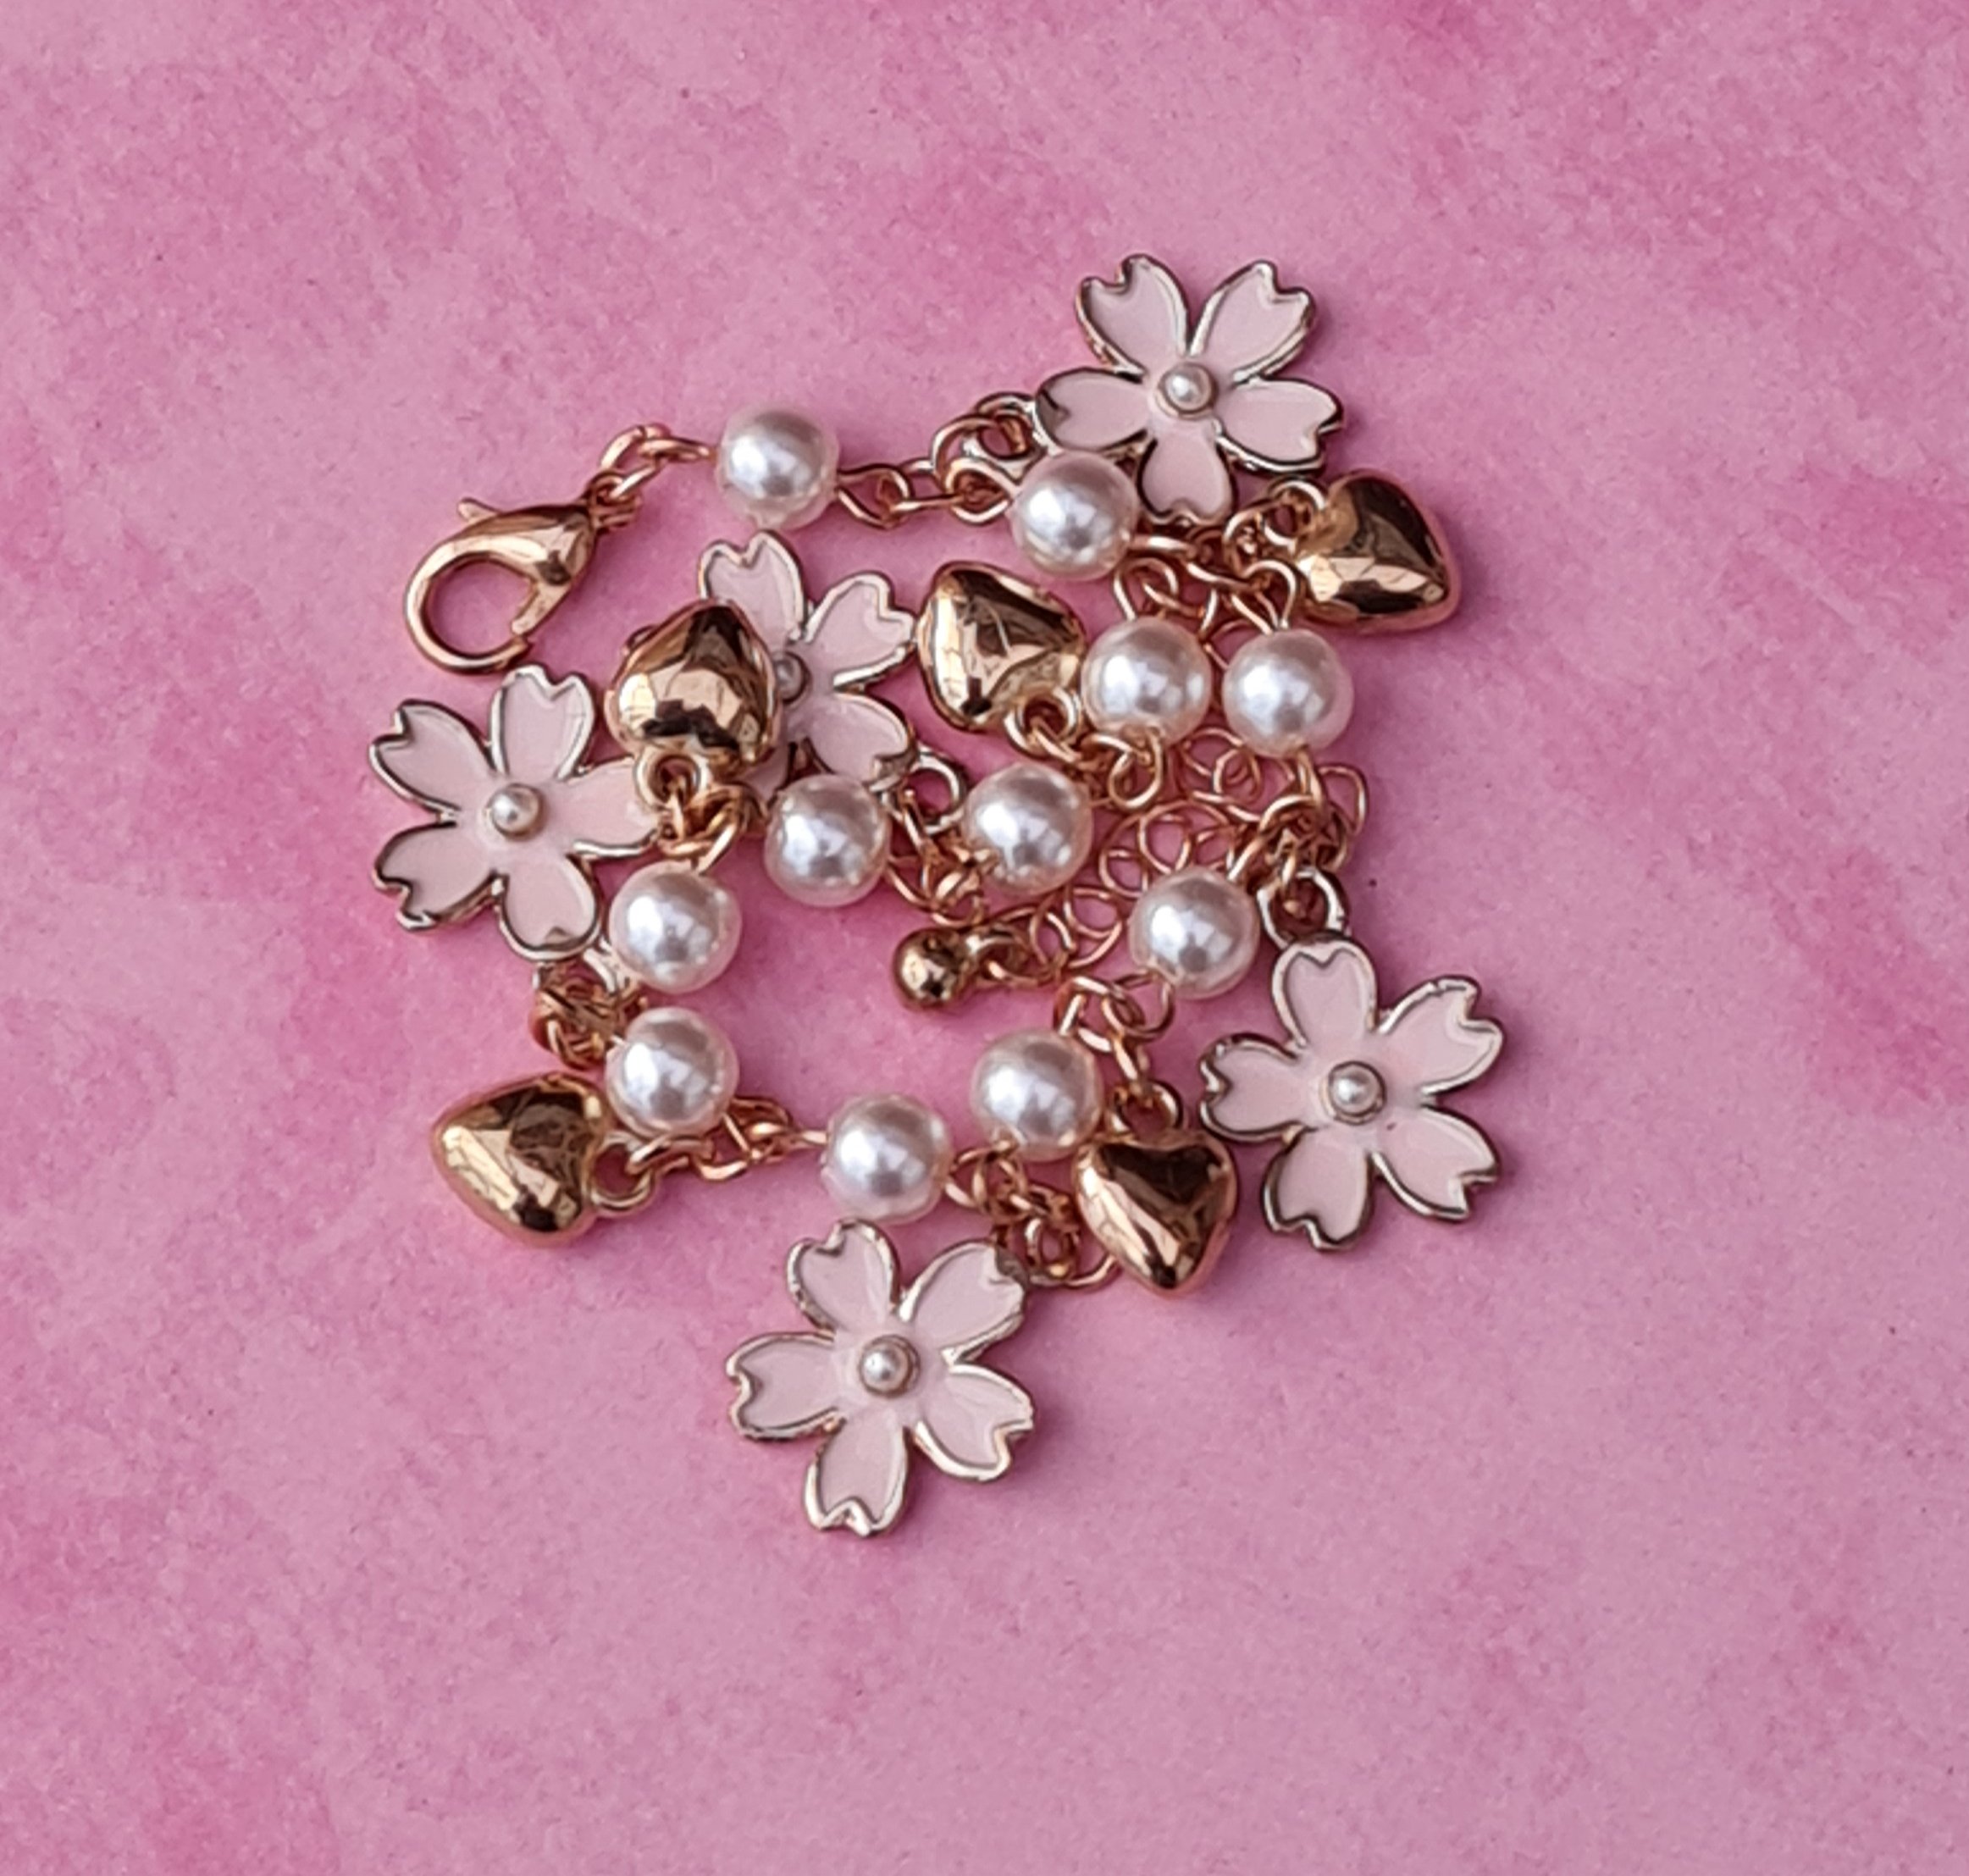 Pink Cherry Blossom Charm Necklace